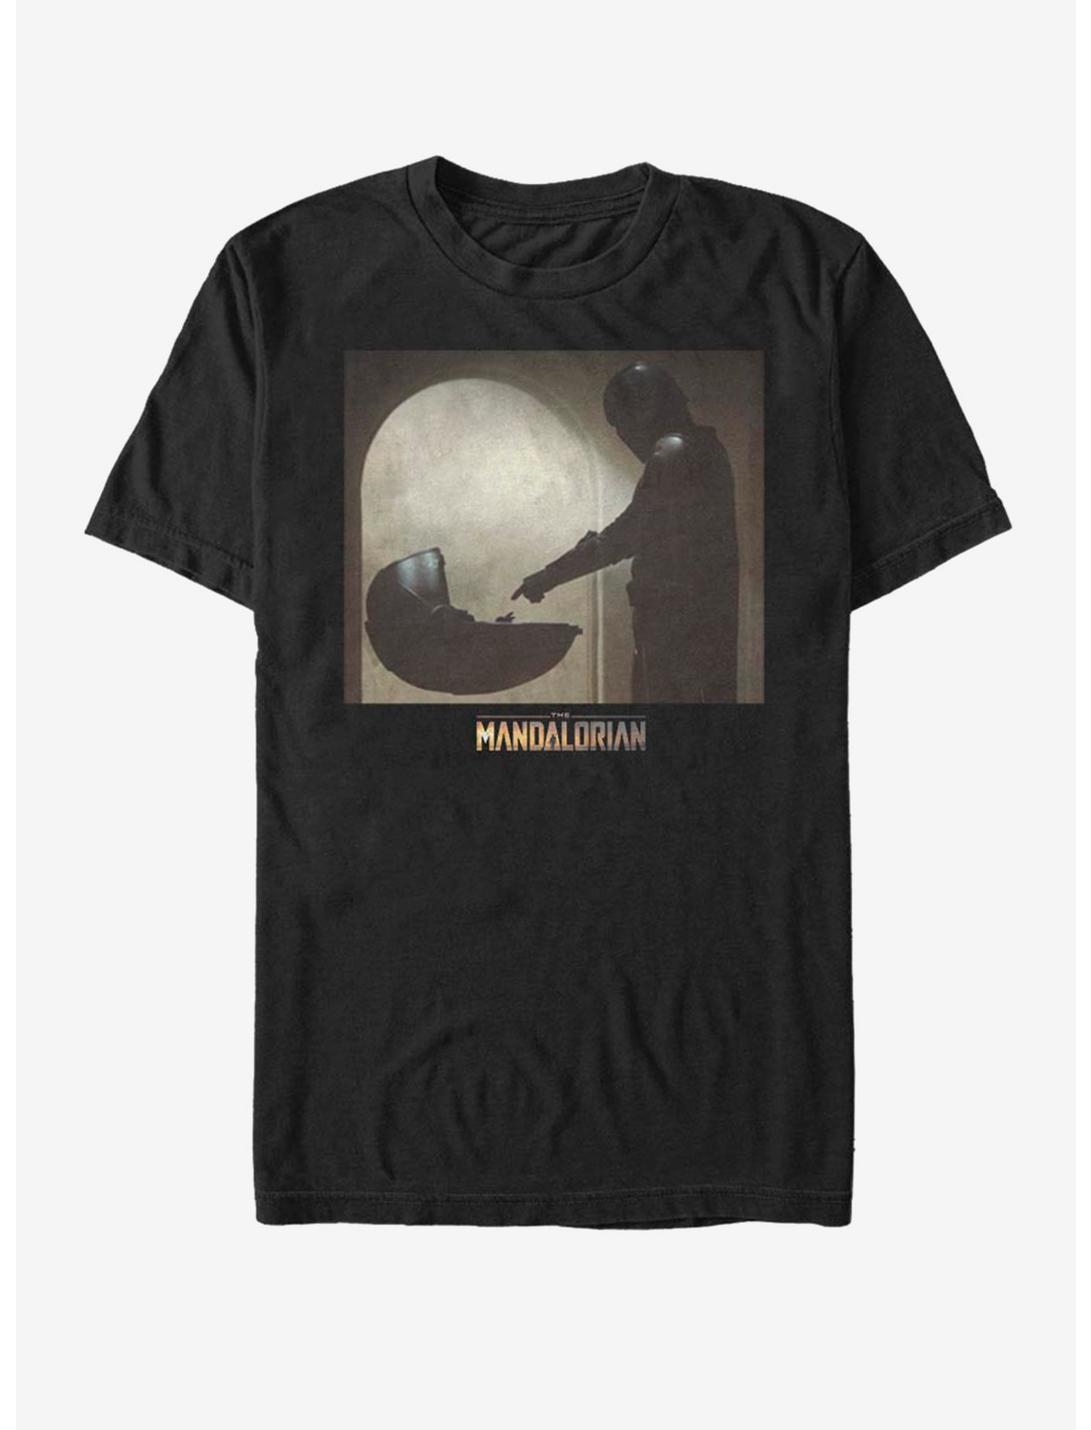 Star Wars The Mandalorian The Child The Touch Scene T-Shirt, BLACK, hi-res